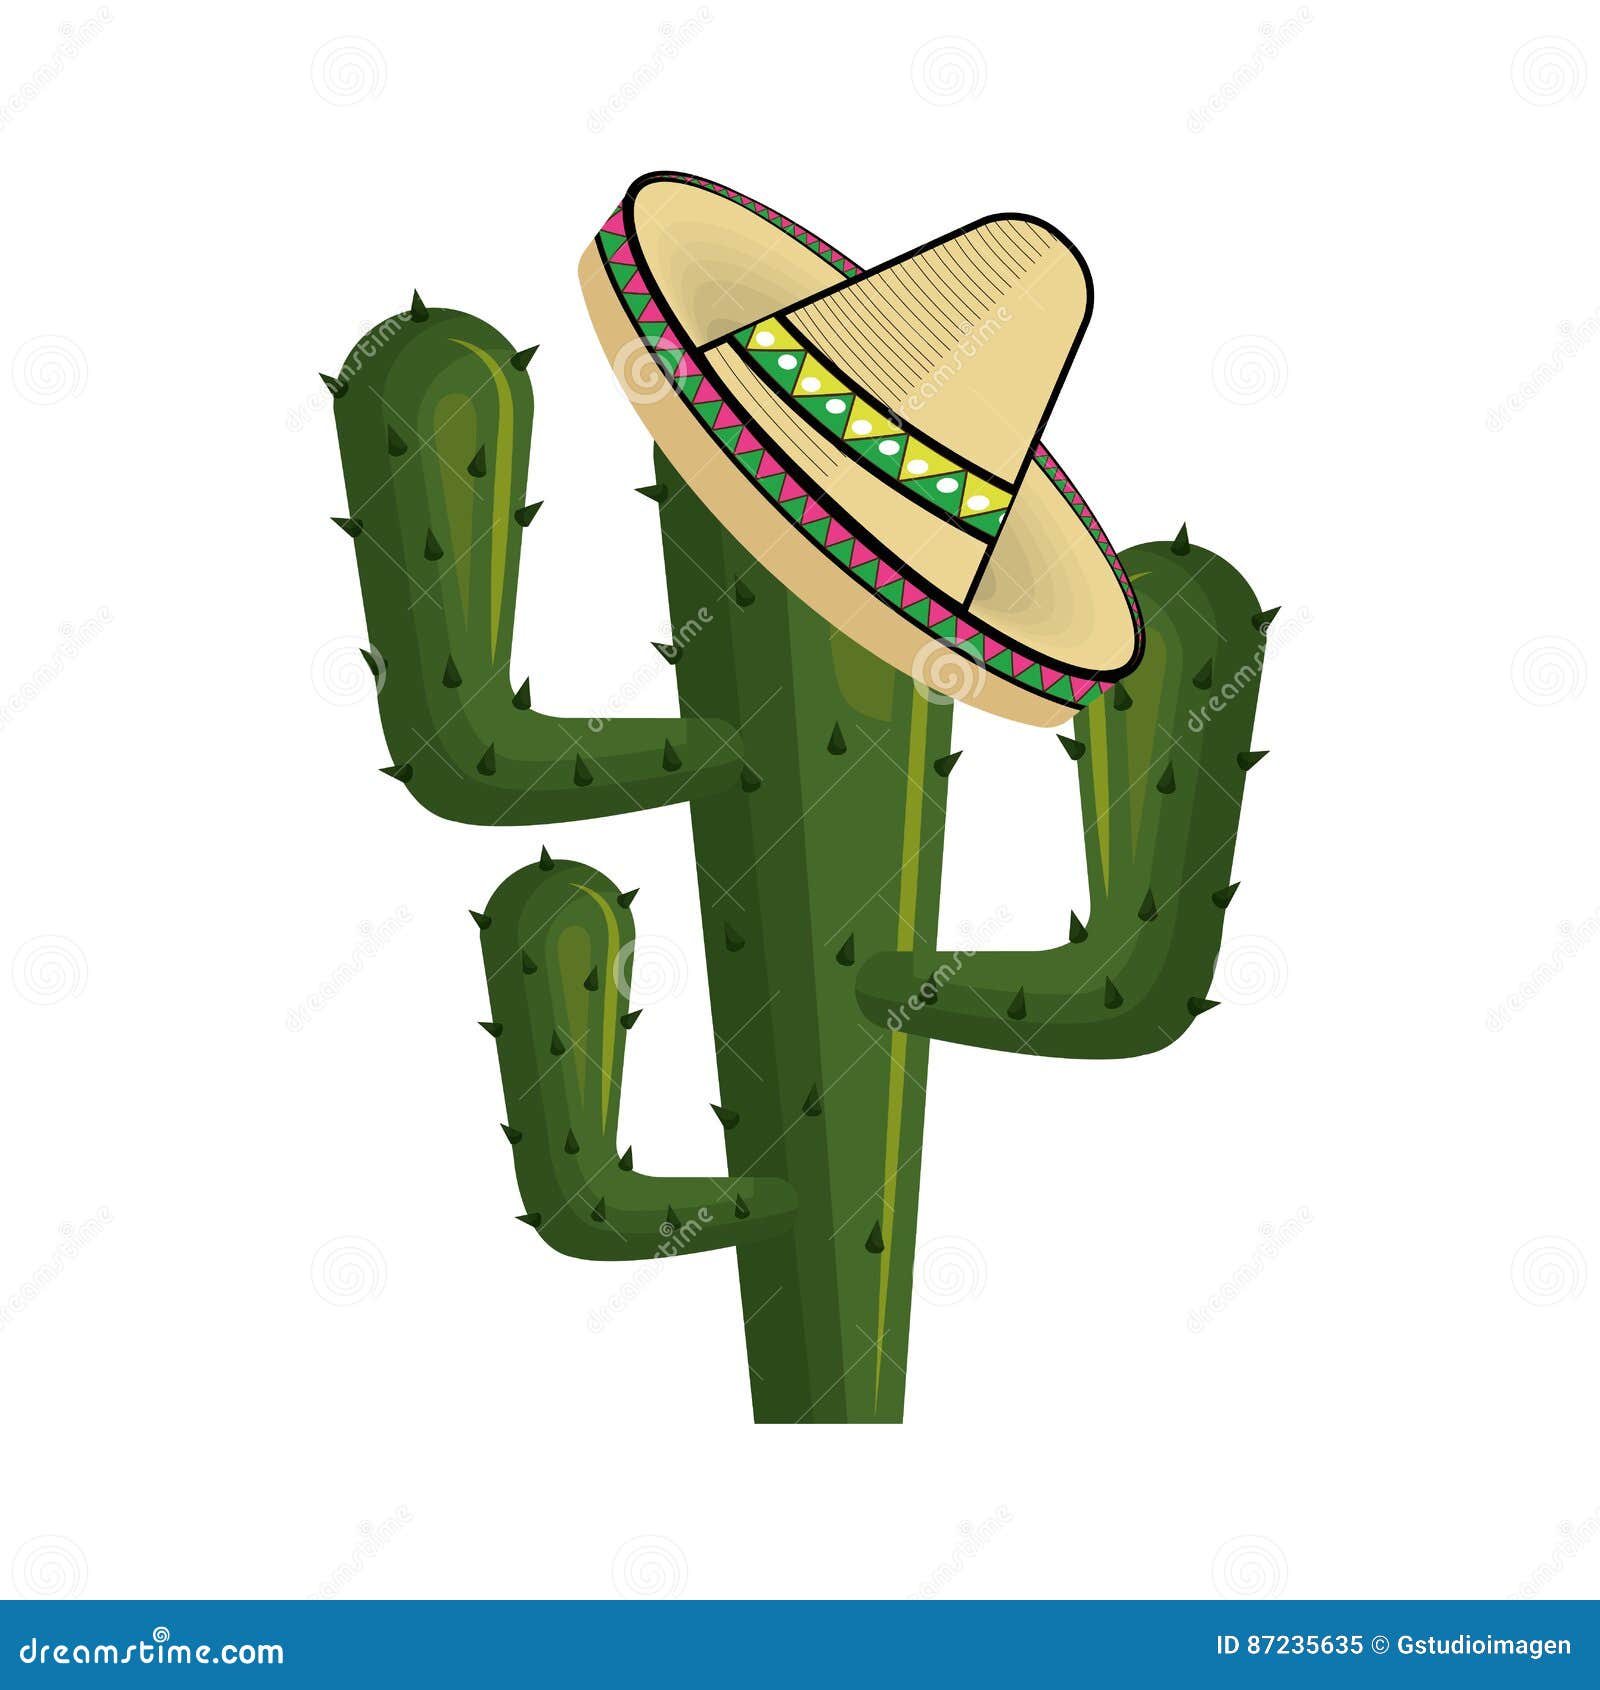 cactus with mexican hat with thorns